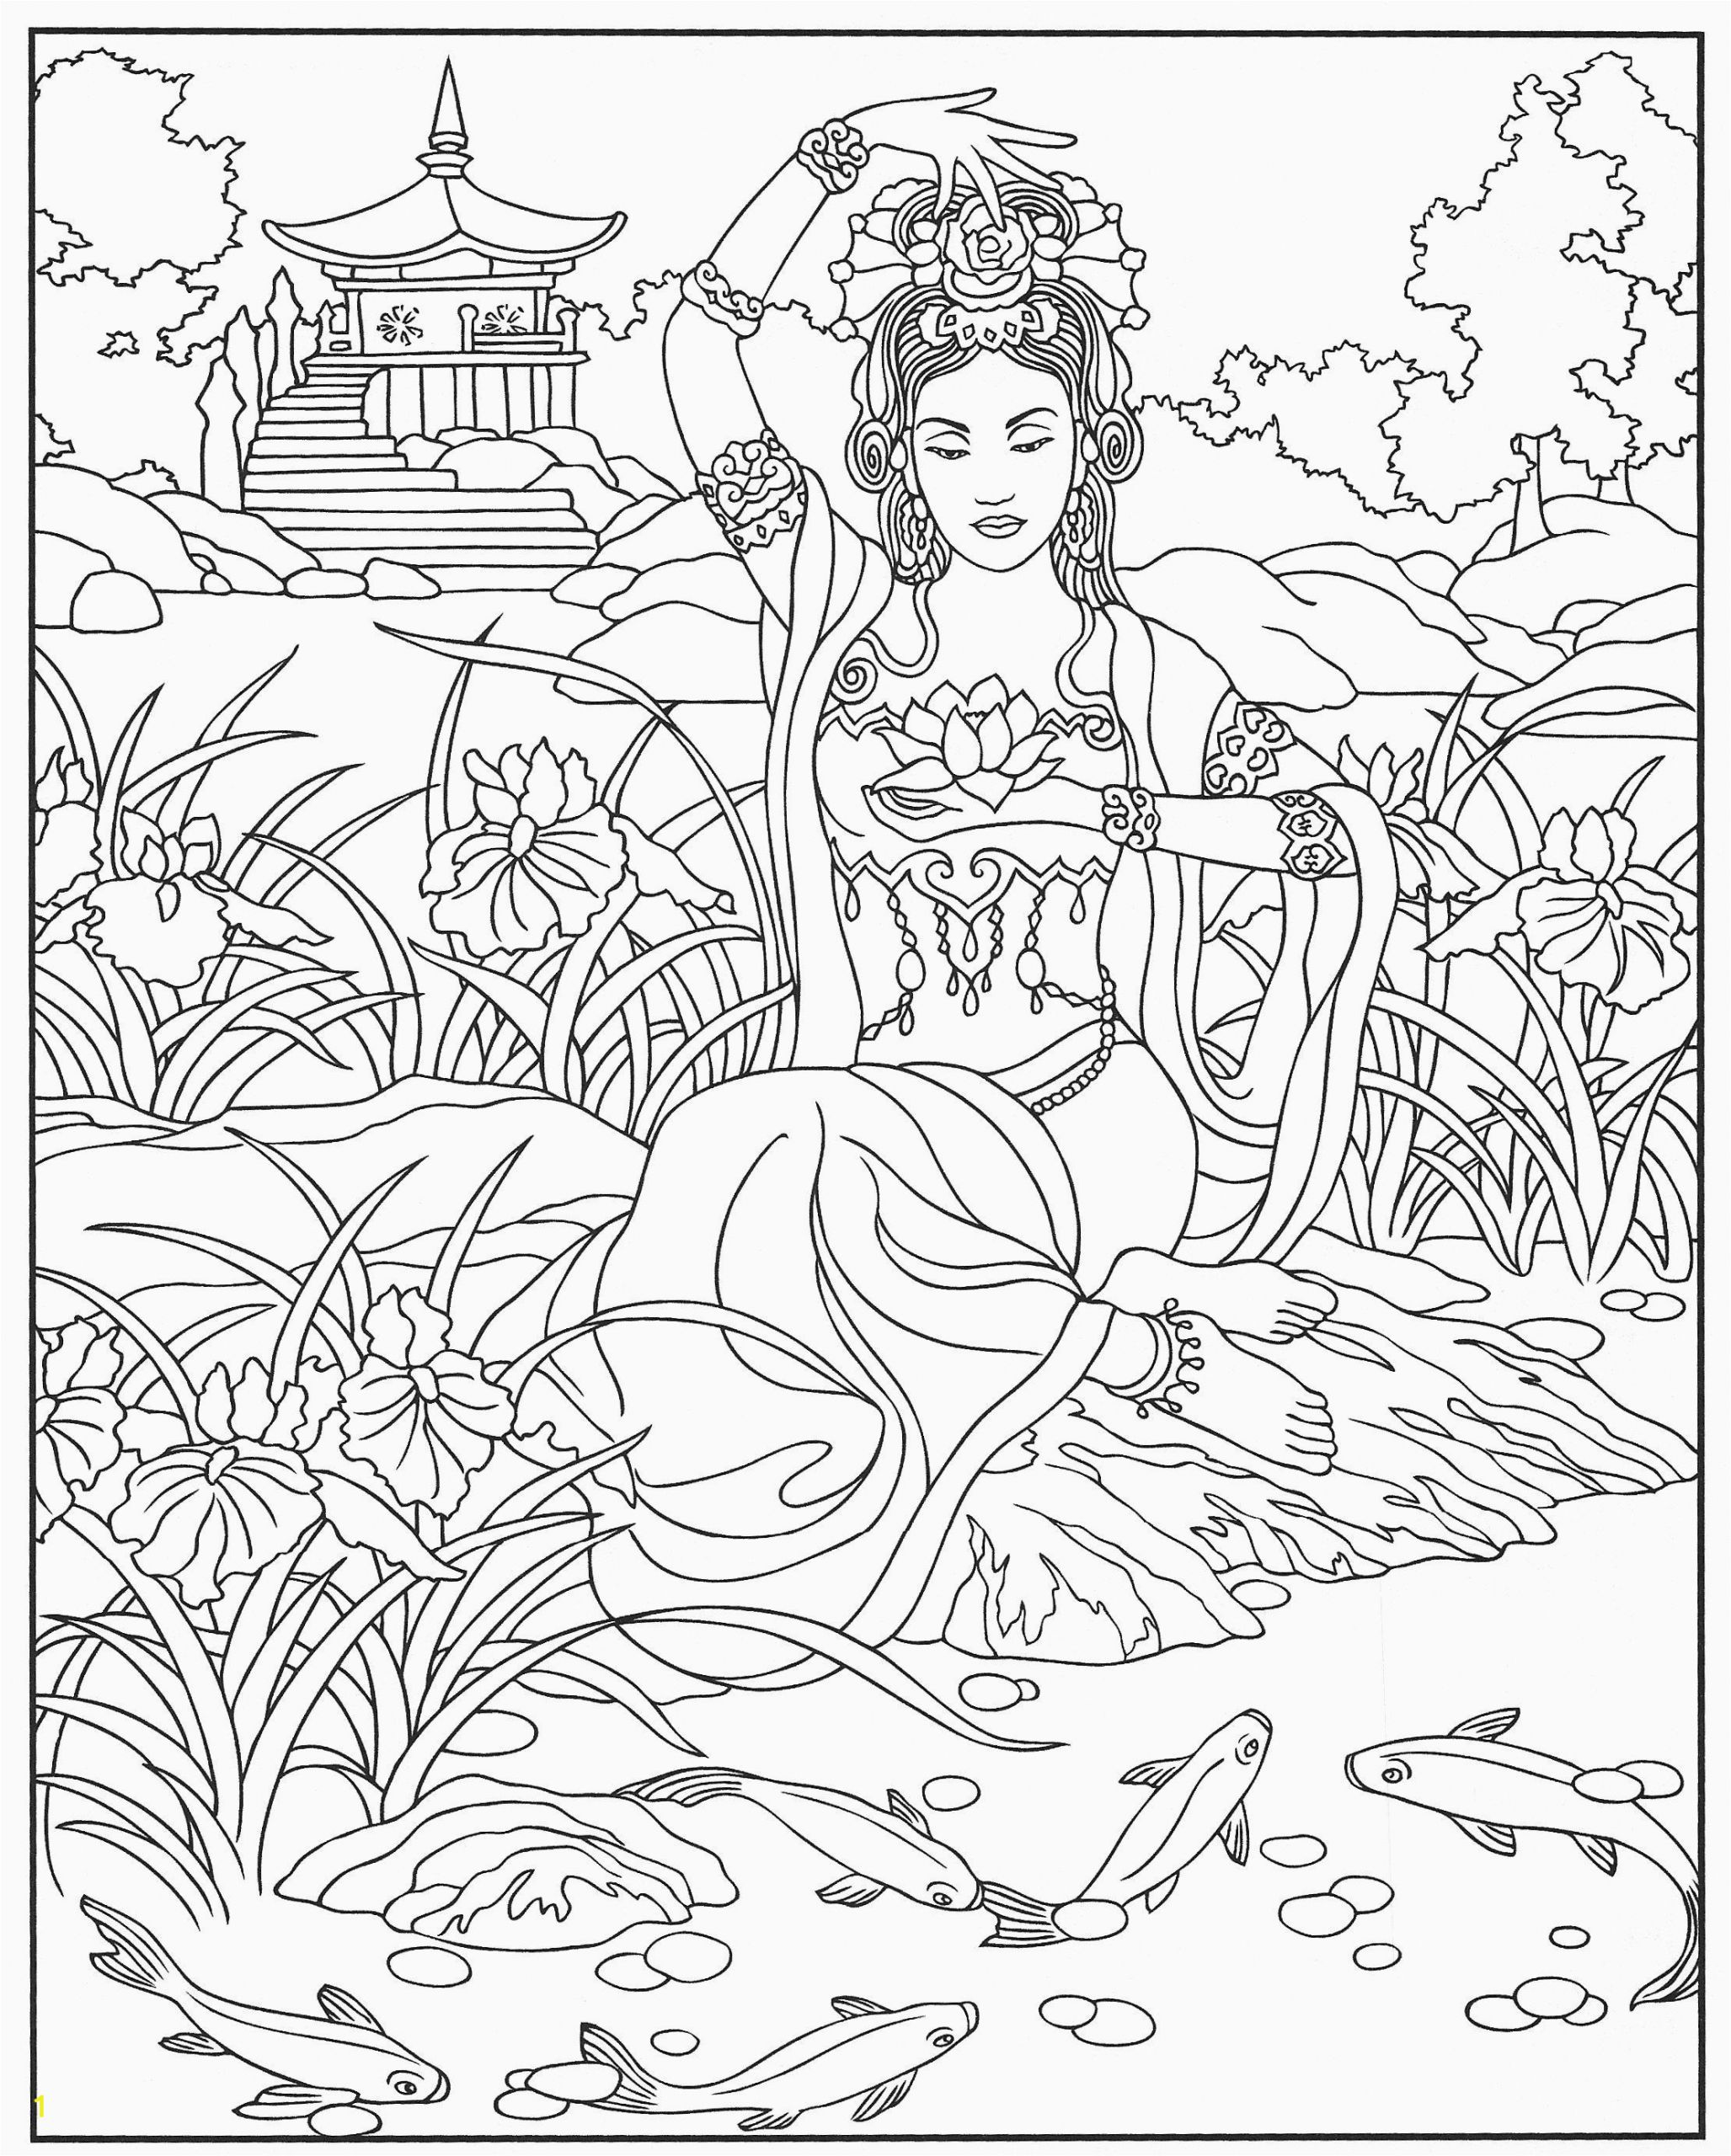 Crayola Coloring Pages Disney Princess Coloring Pages for Teenagers Awesome Cool Coloring Page